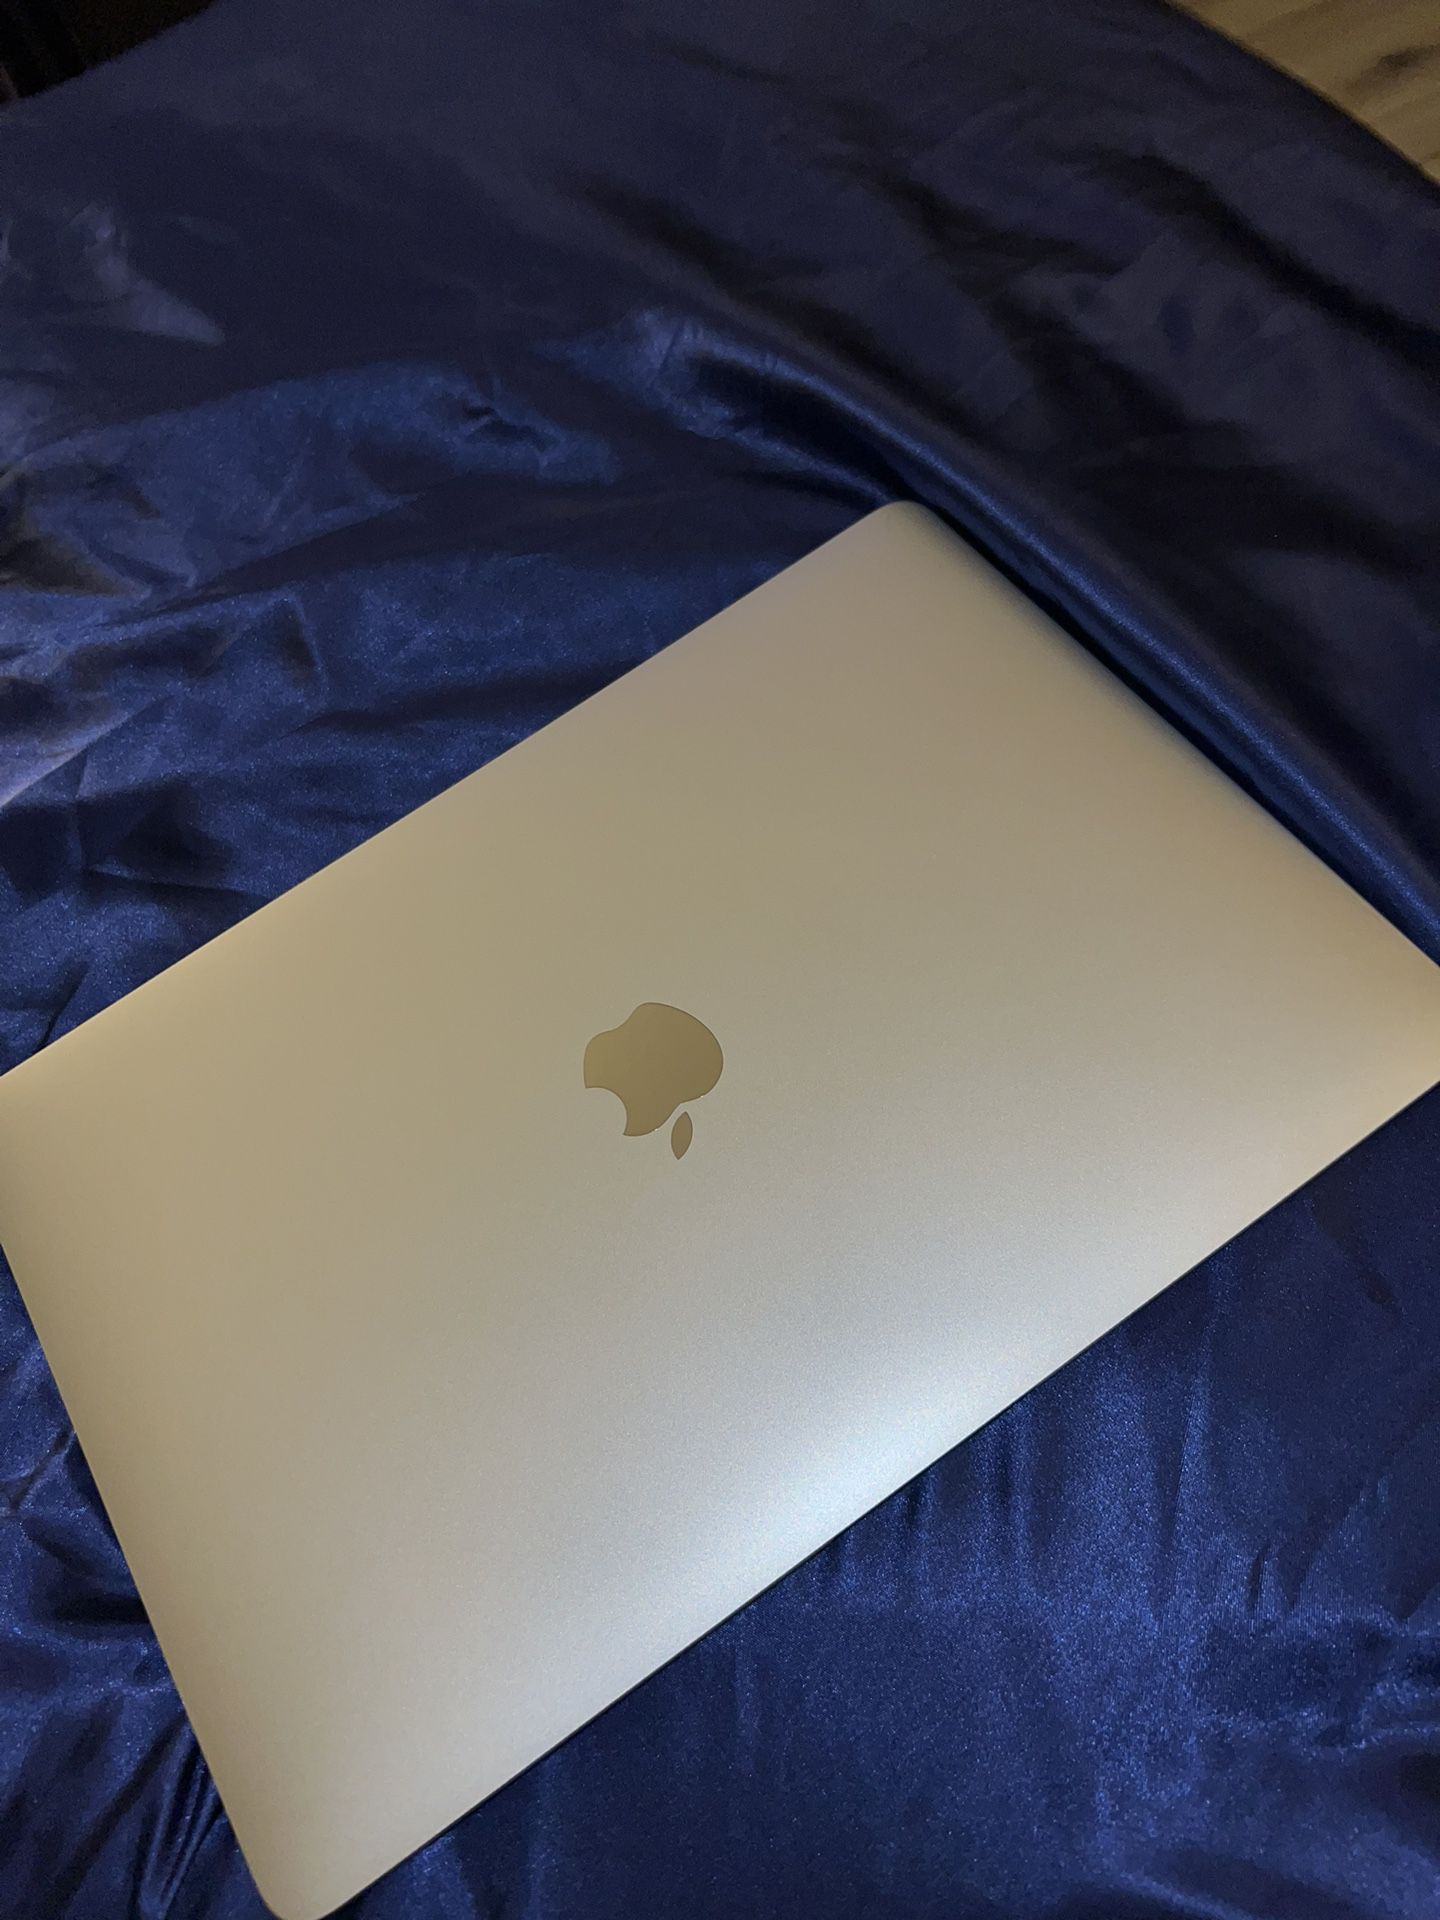 MacBook Air 2020 M1. Barely Used. Perfect Condition.